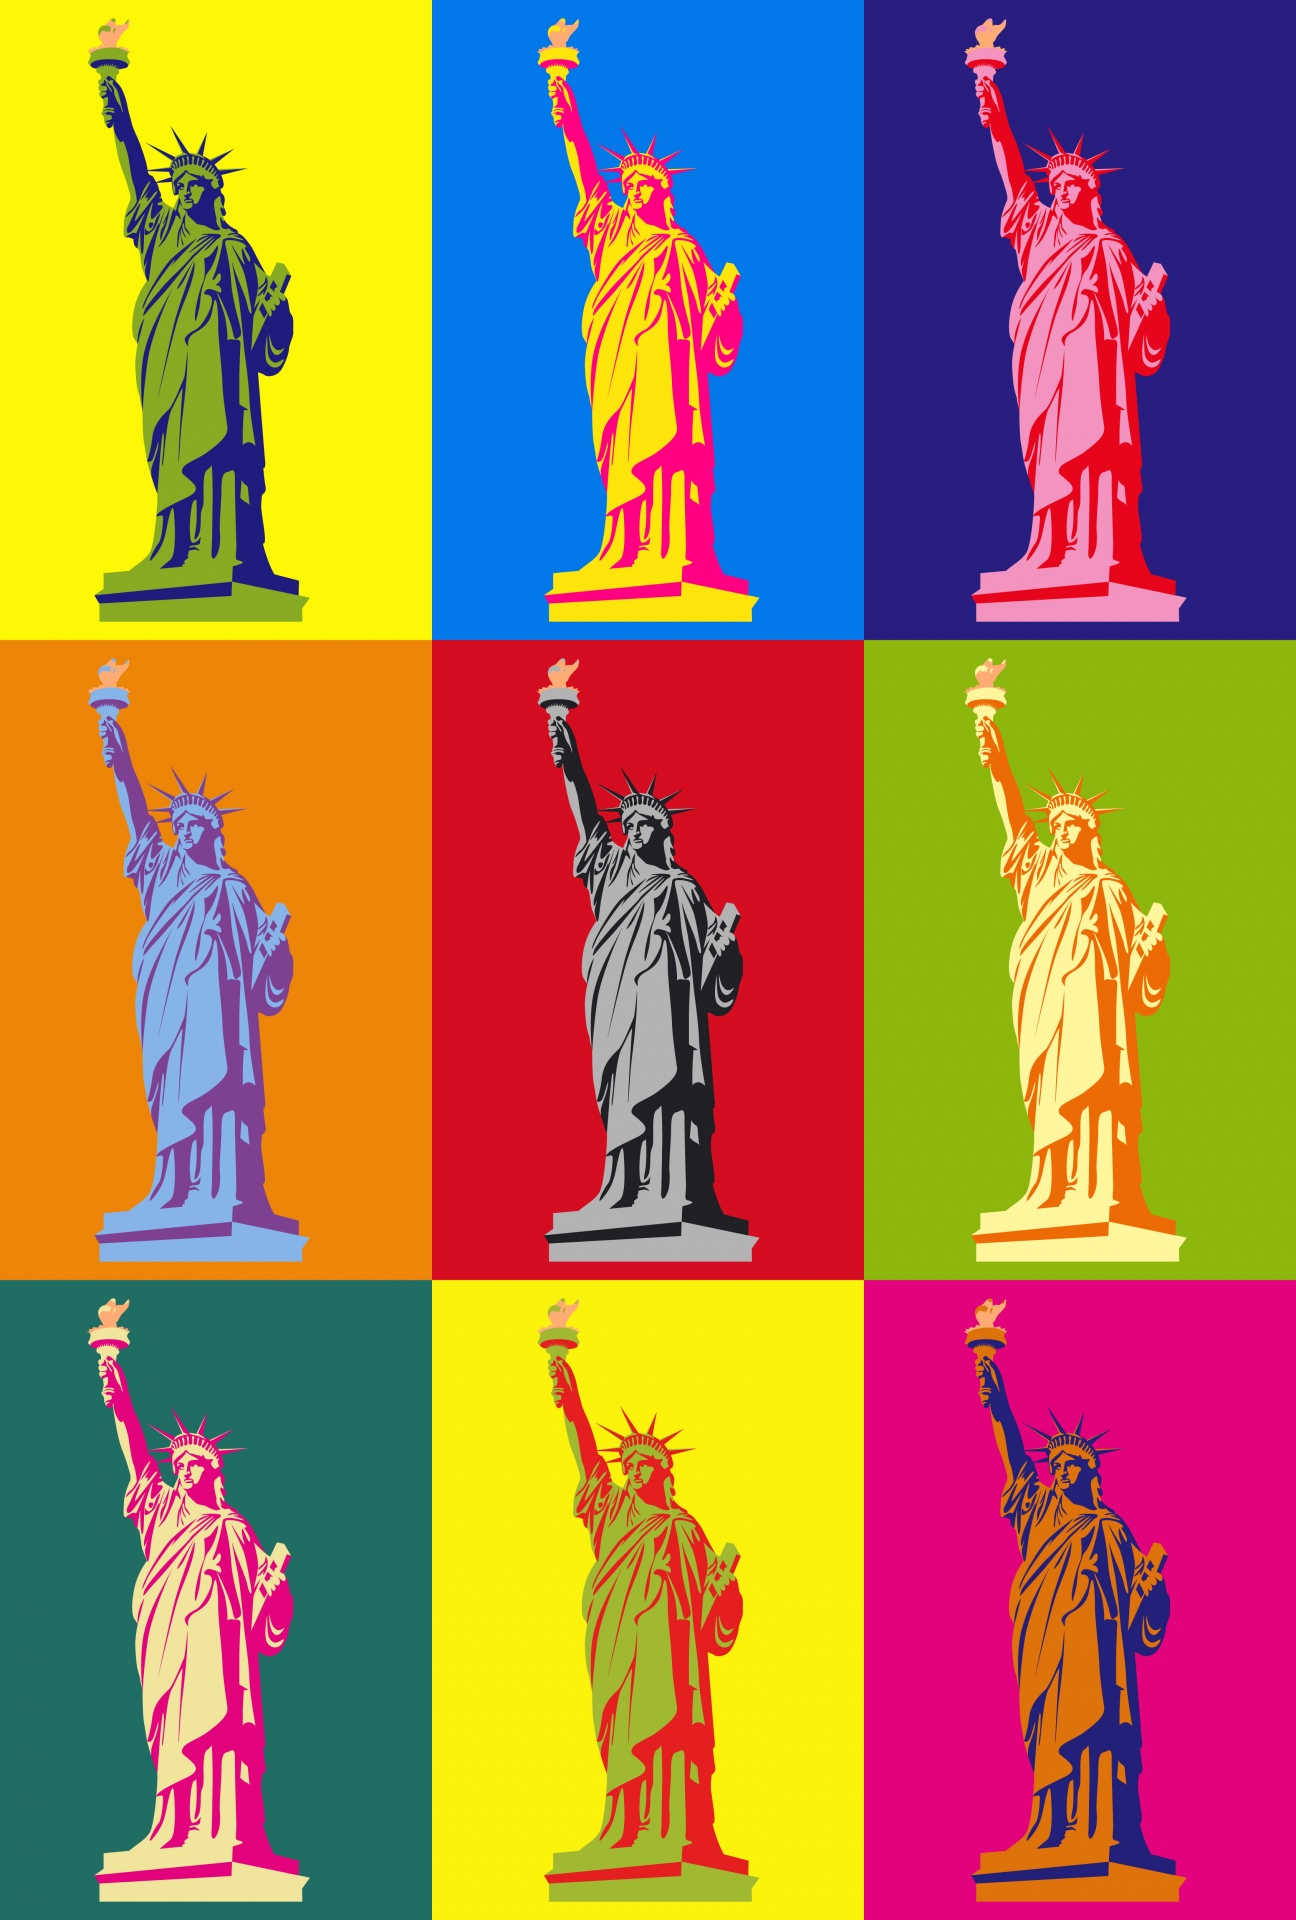 Colorful retro vintage style pop art poster of Statue of Liberty